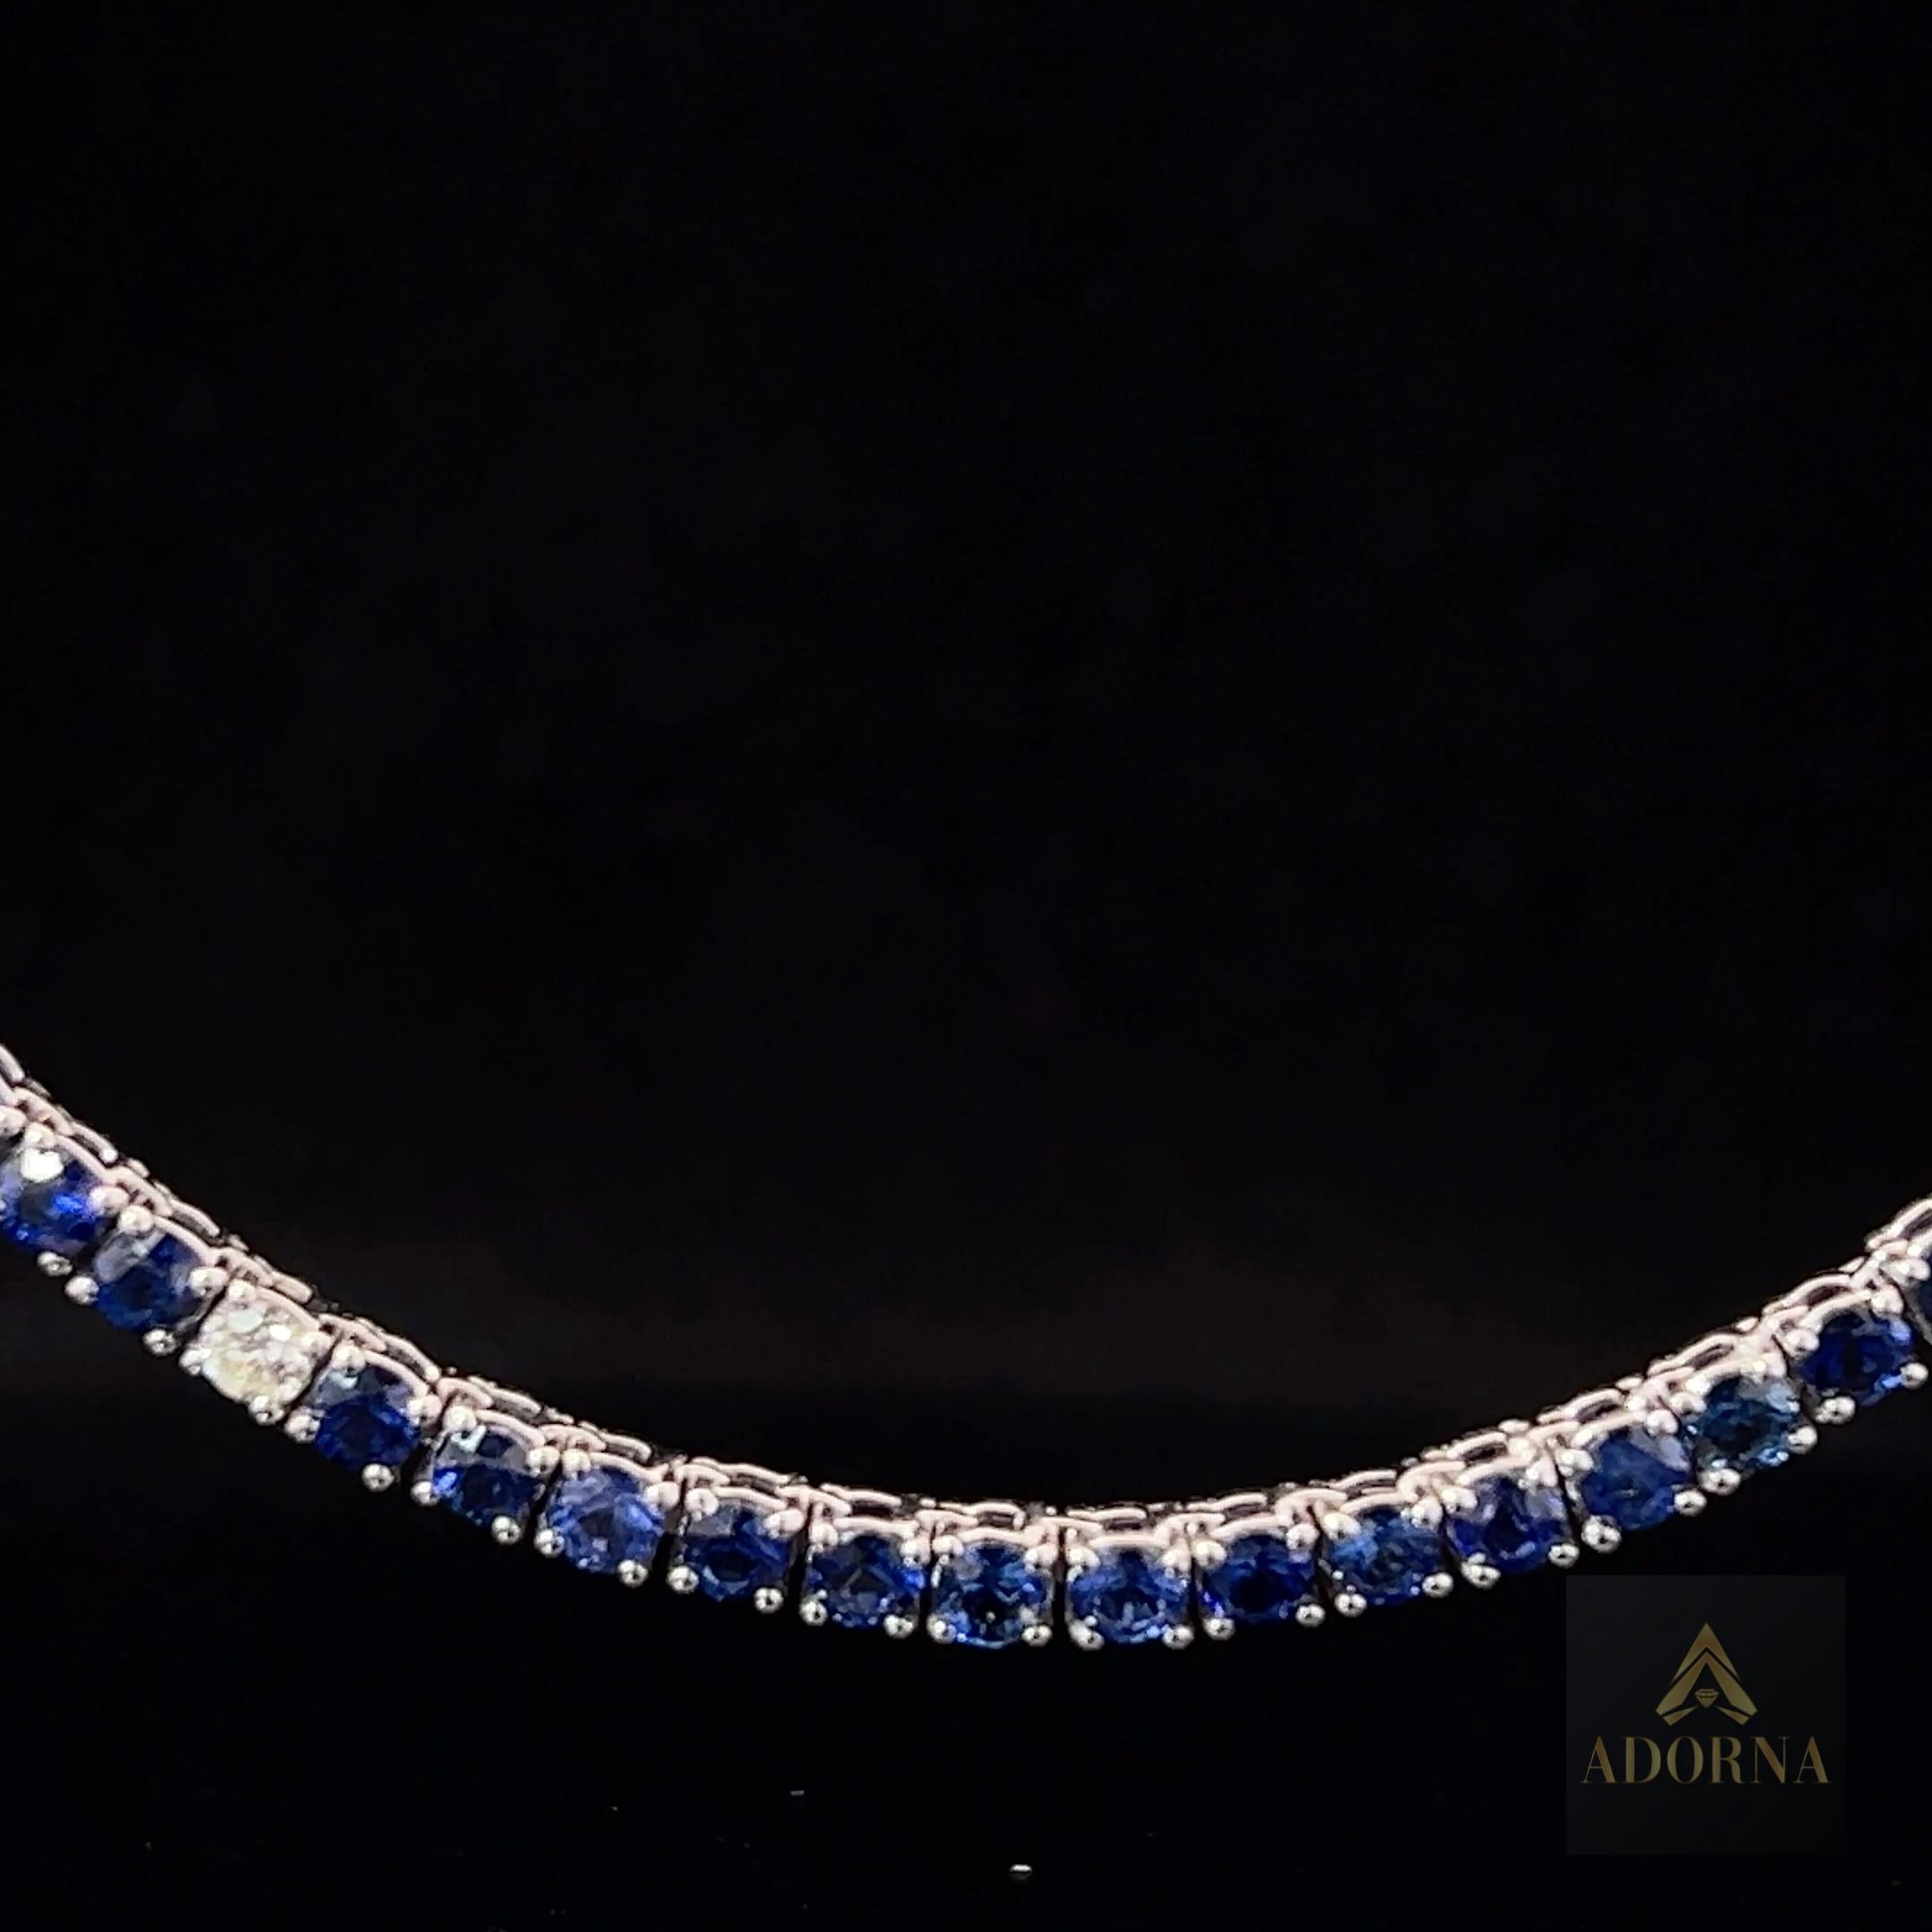 Necklace Information
Diamond Type : Natural Diamond
Metal : 14K
Metal Color : White Gold
Diamond Carat Weight : 0.74ttcw
 

JEWELRY CARE
Over the course of time, body oil and skin products can collect on Jewelry and leave a residue which can occlude